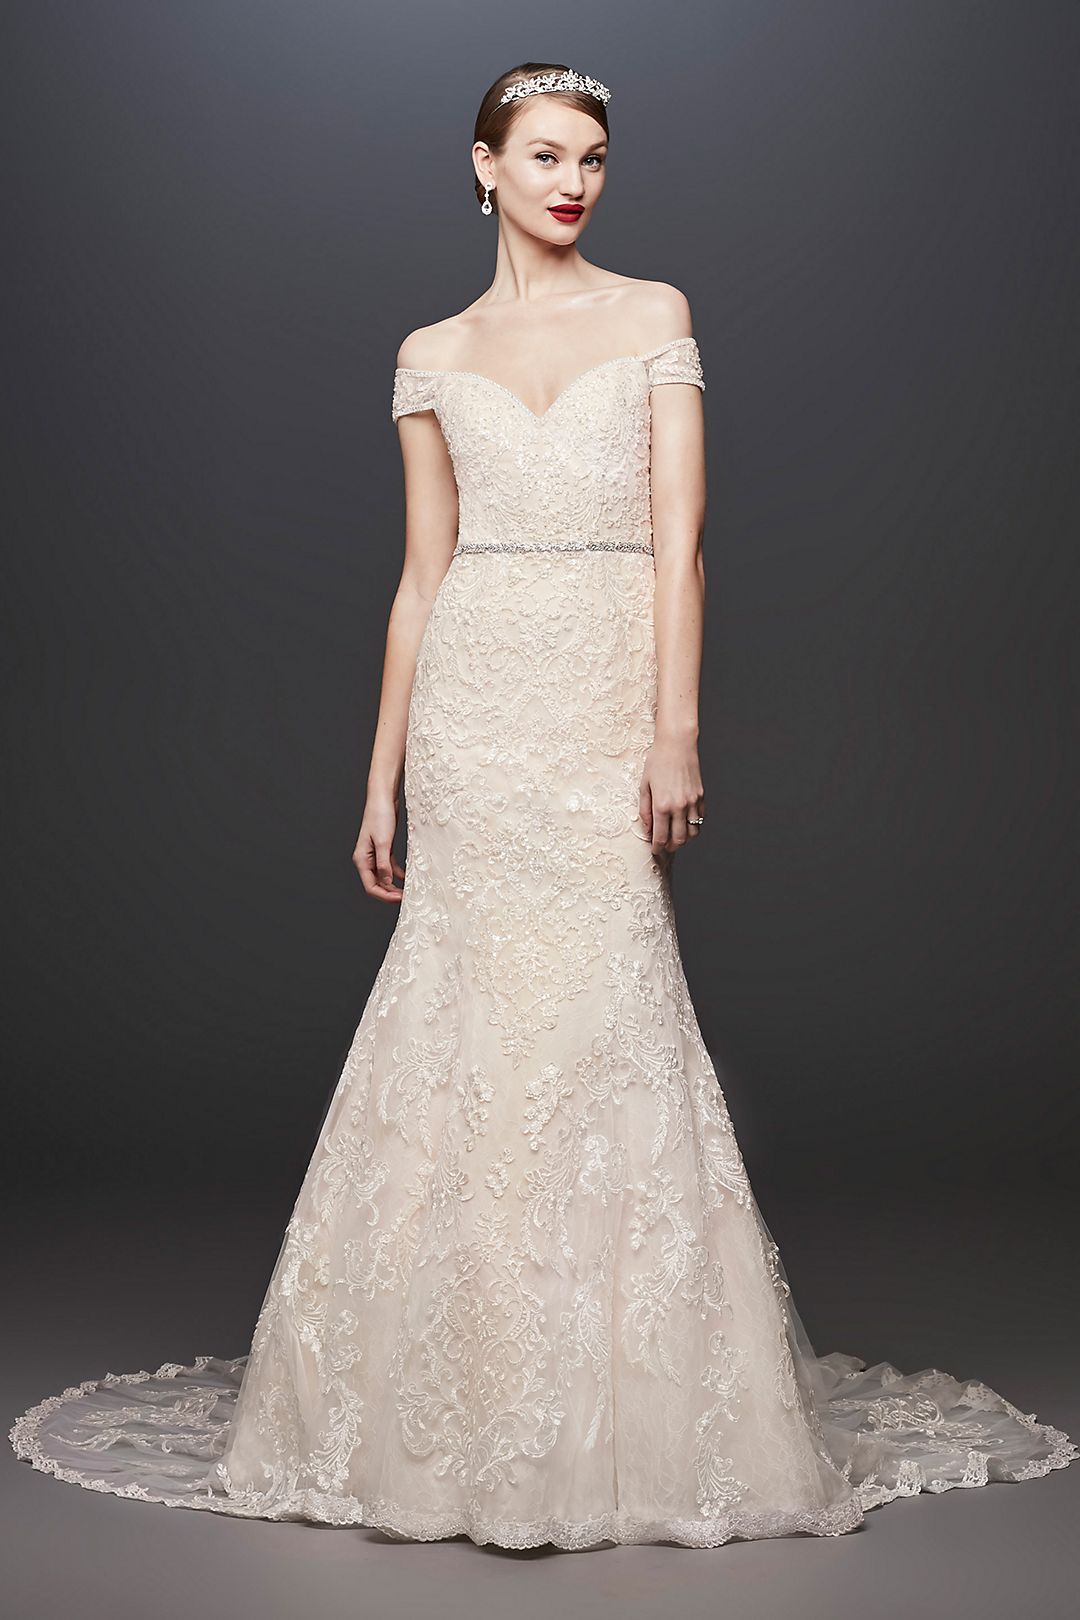 As-Is Beaded Lace Off-the-Shoulder Wedding Dress Image 1